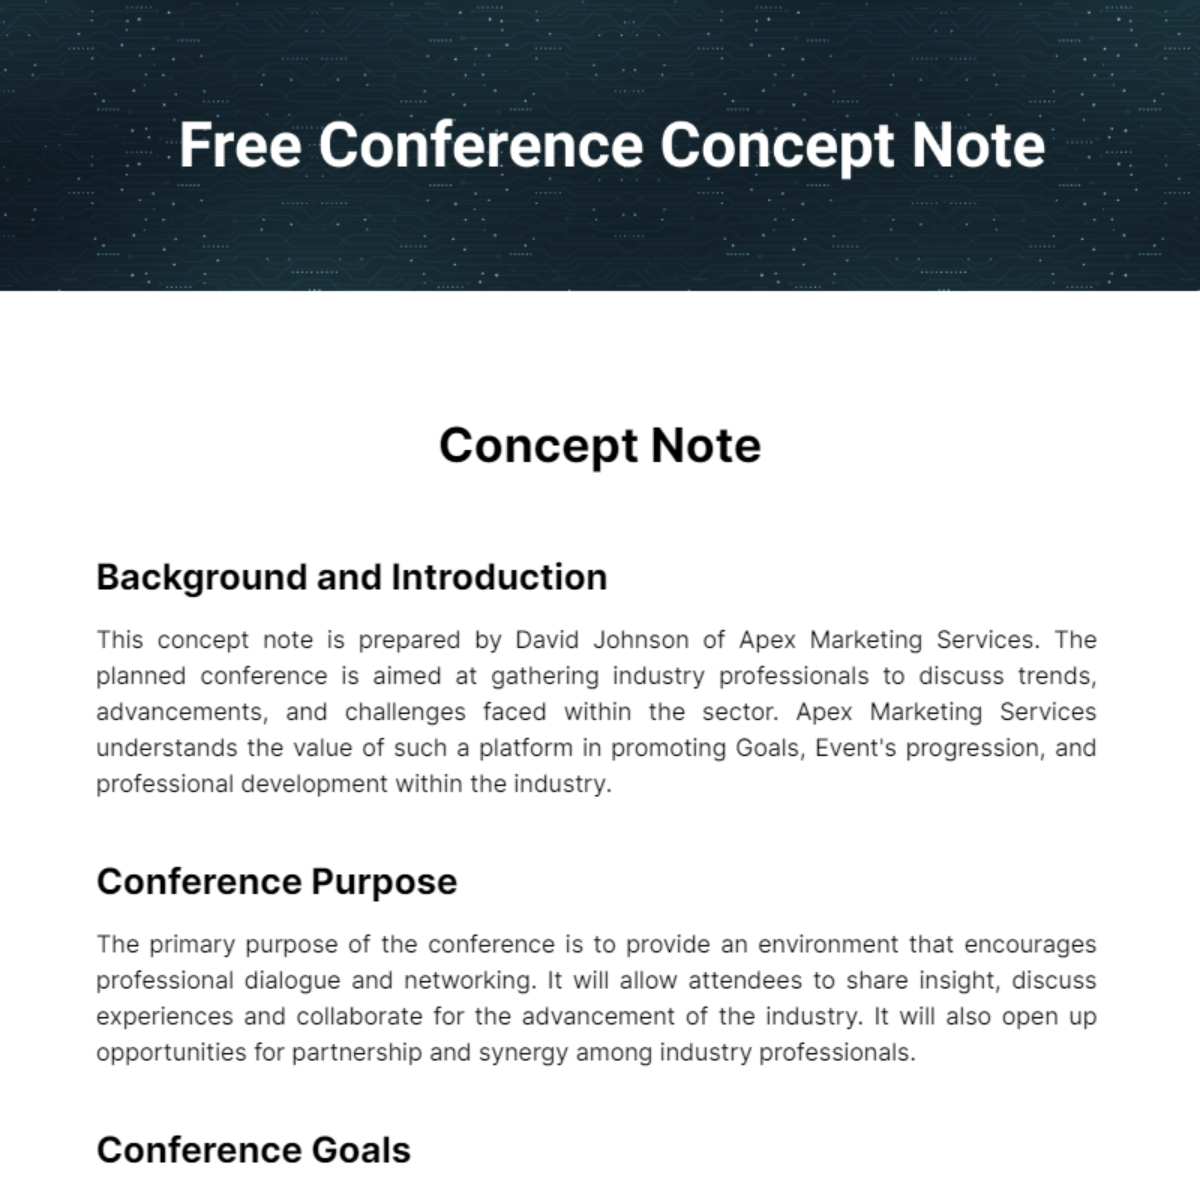 Free Conference Concept Note Template